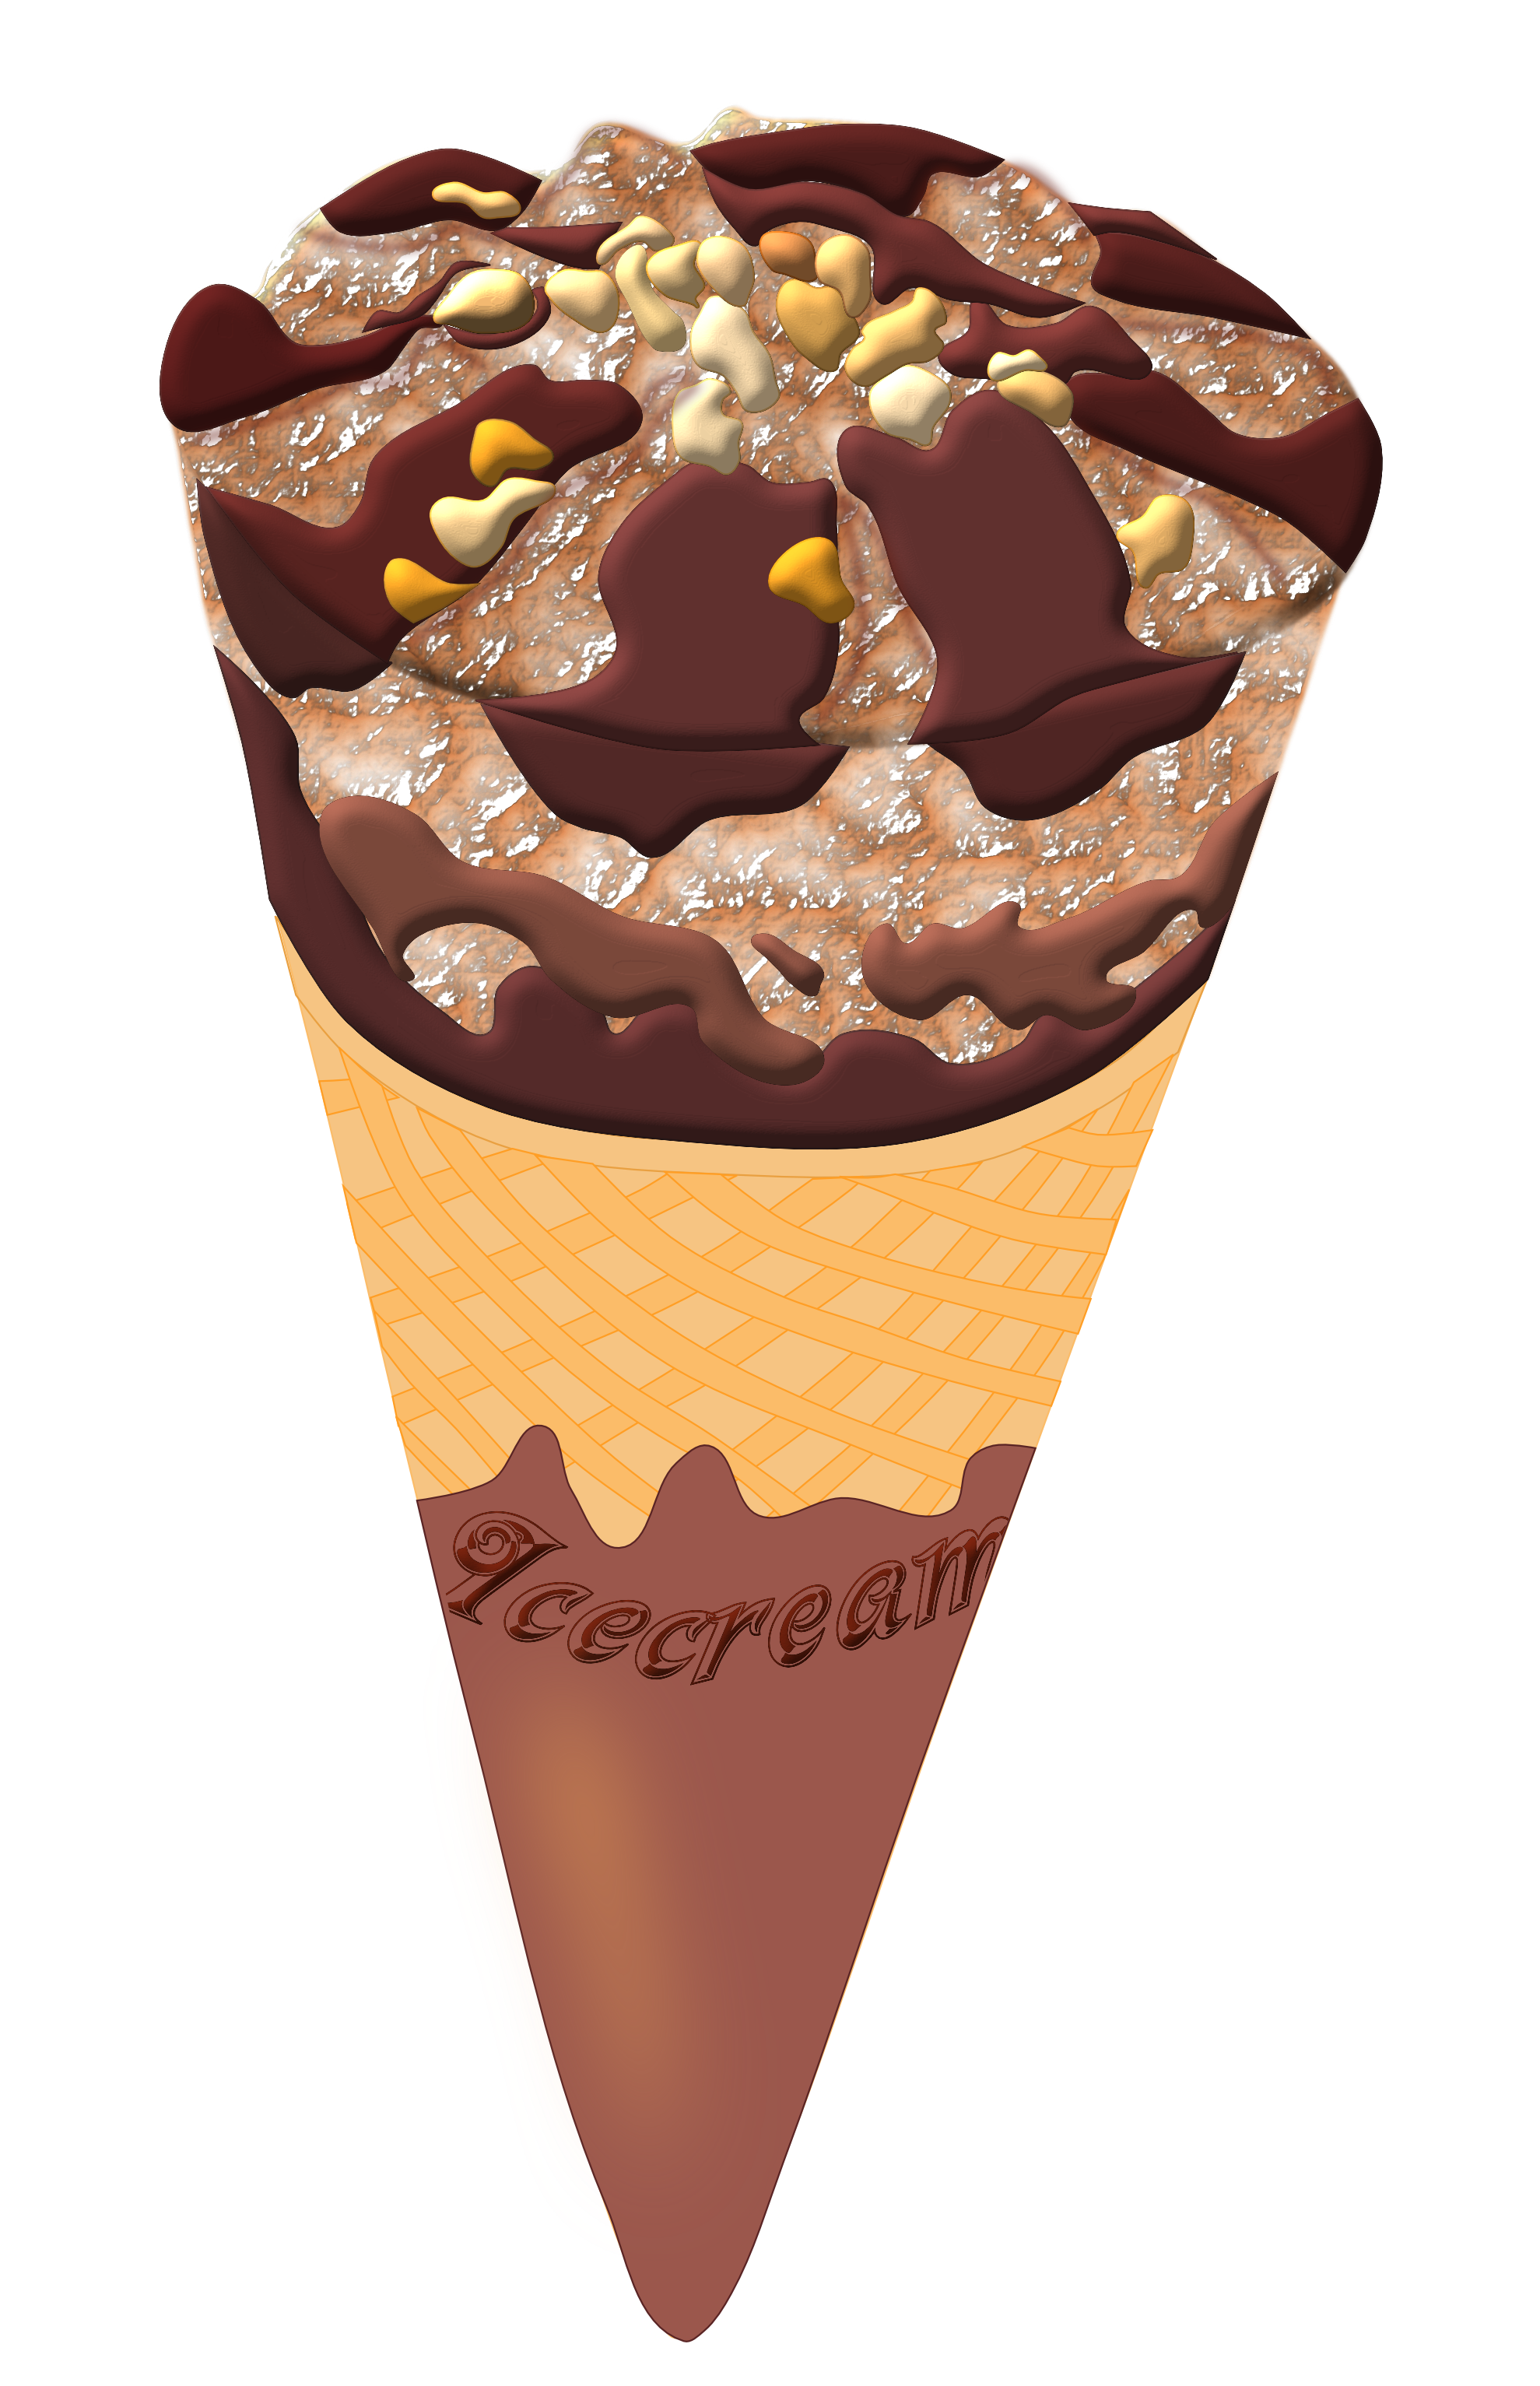  Ice  Cream  PNG  image free ice  cream  PNG  pictures download